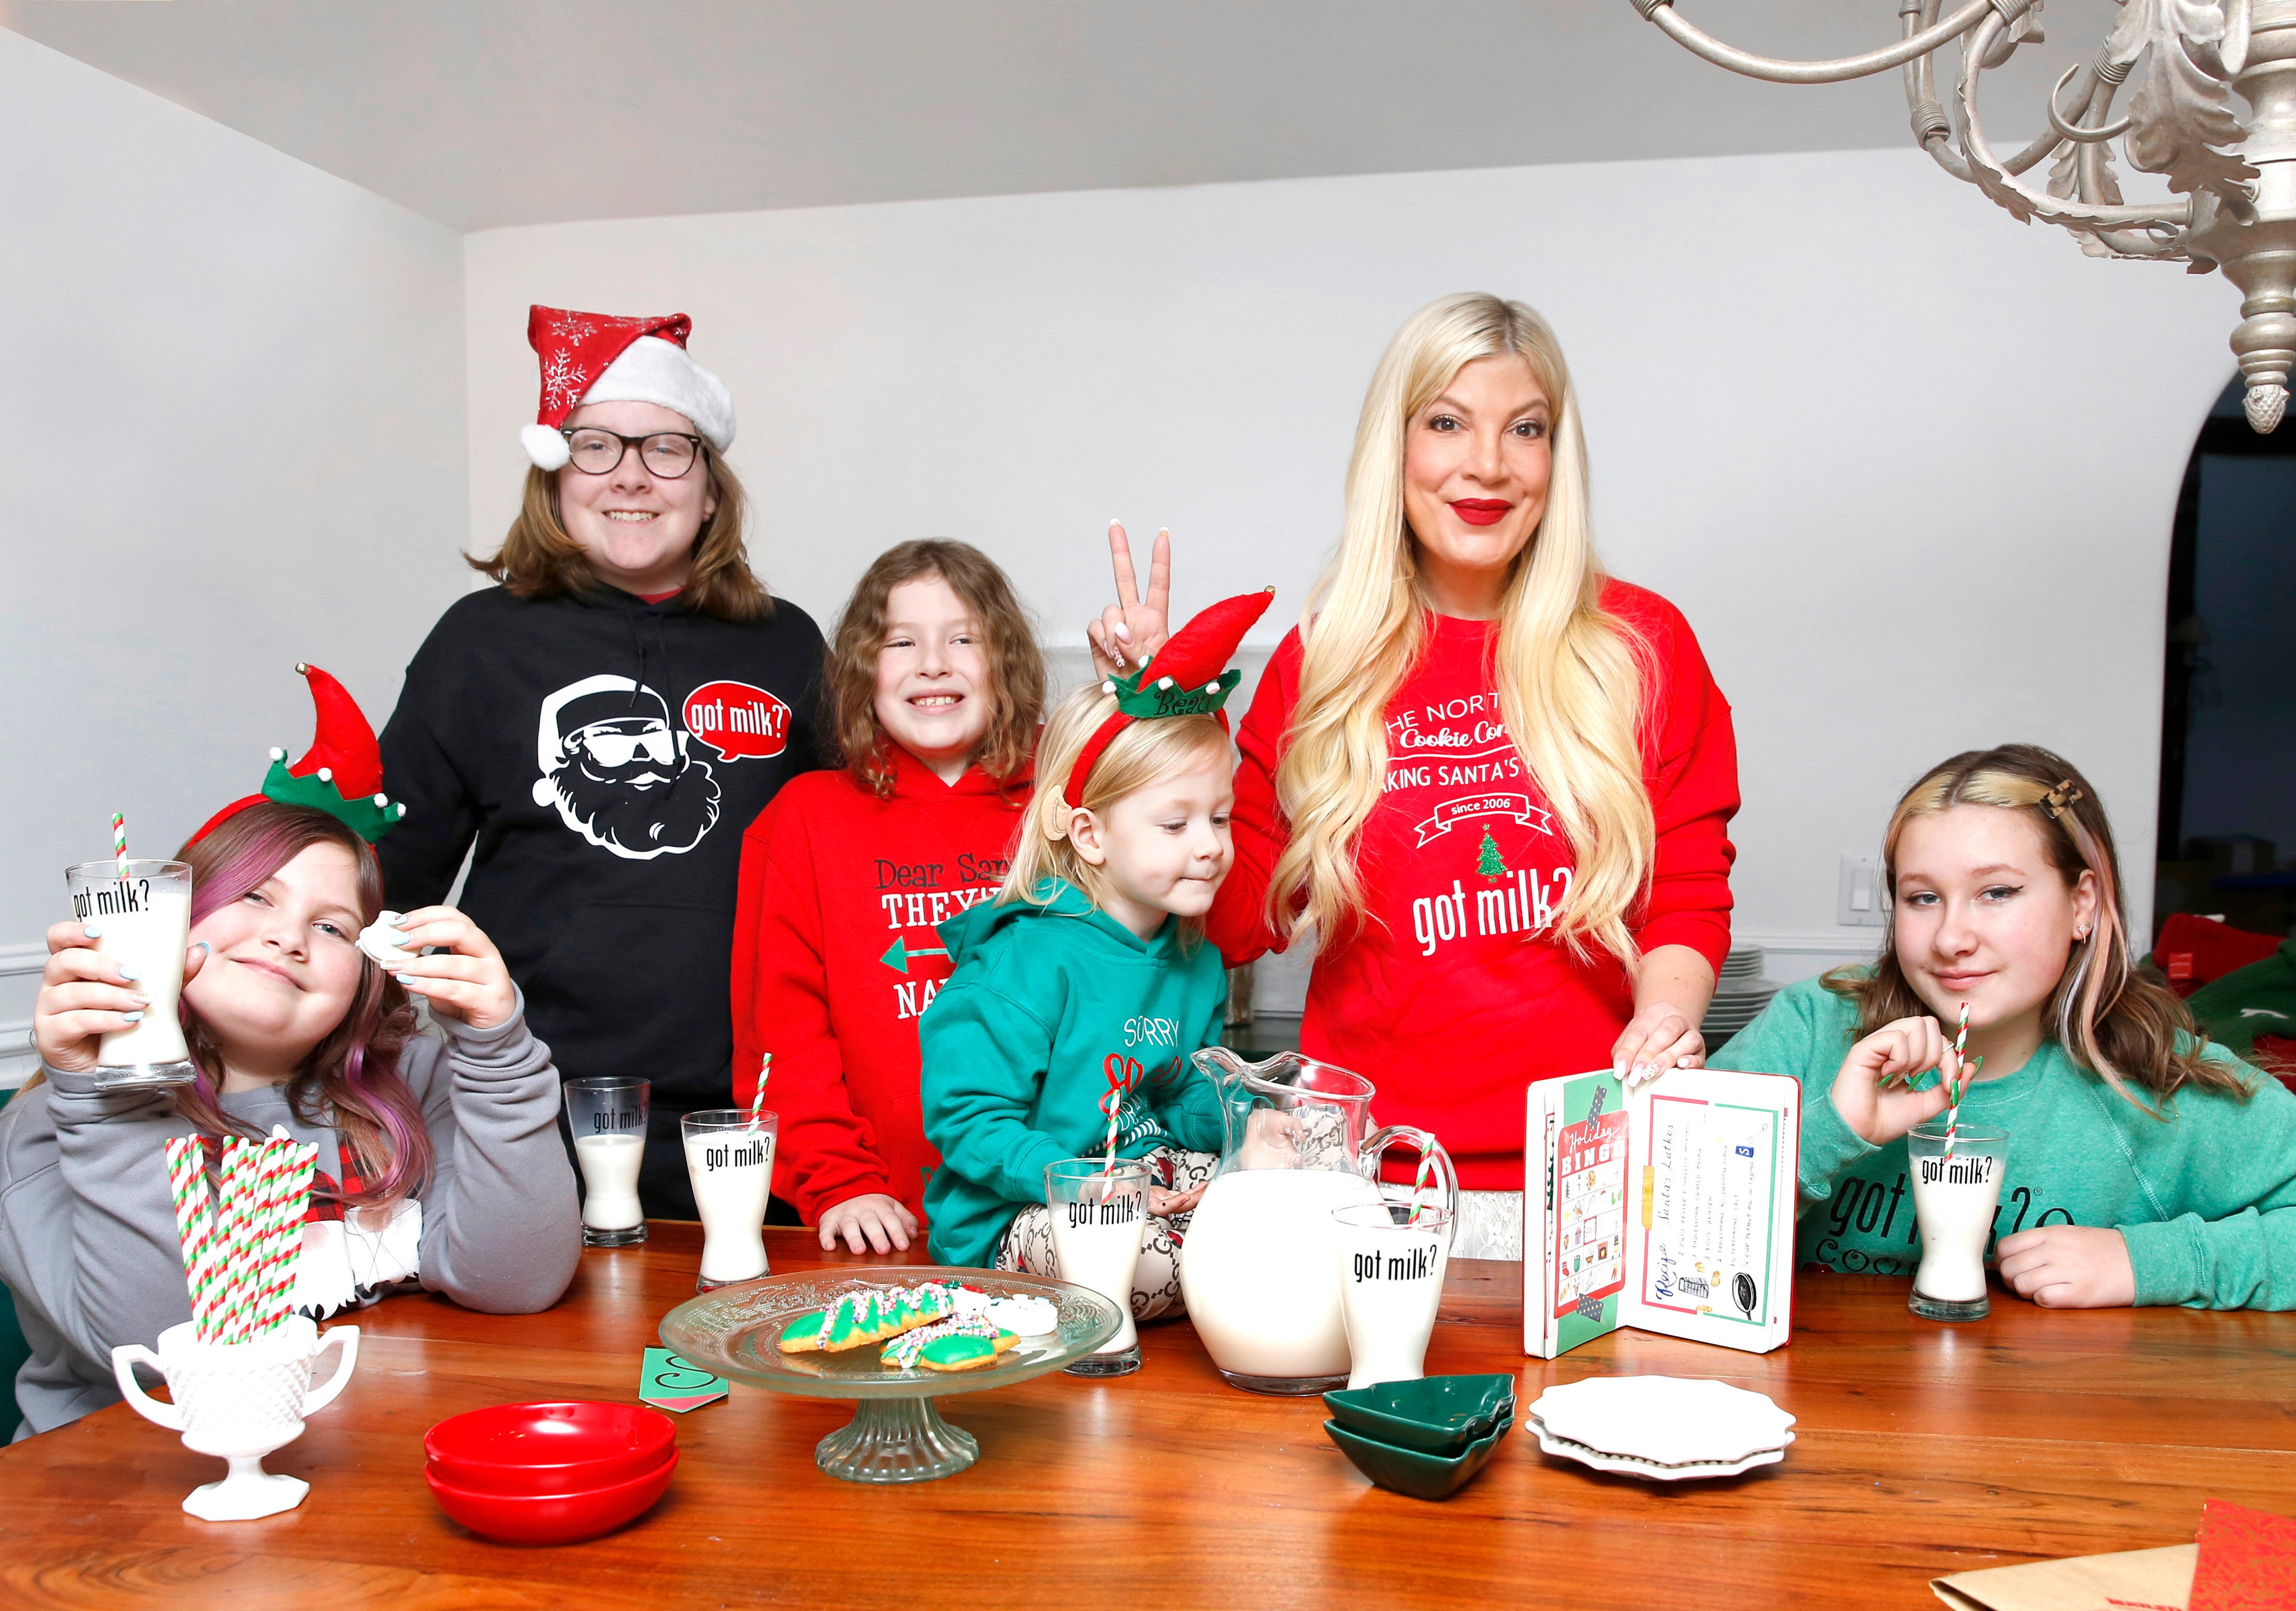 Tori Spelling and her children, Hattie McDermott, Liam McDermott, Finn McDermott, Beau McDermott and Stella McDermott pose for a photo for the Got Milk? campaign